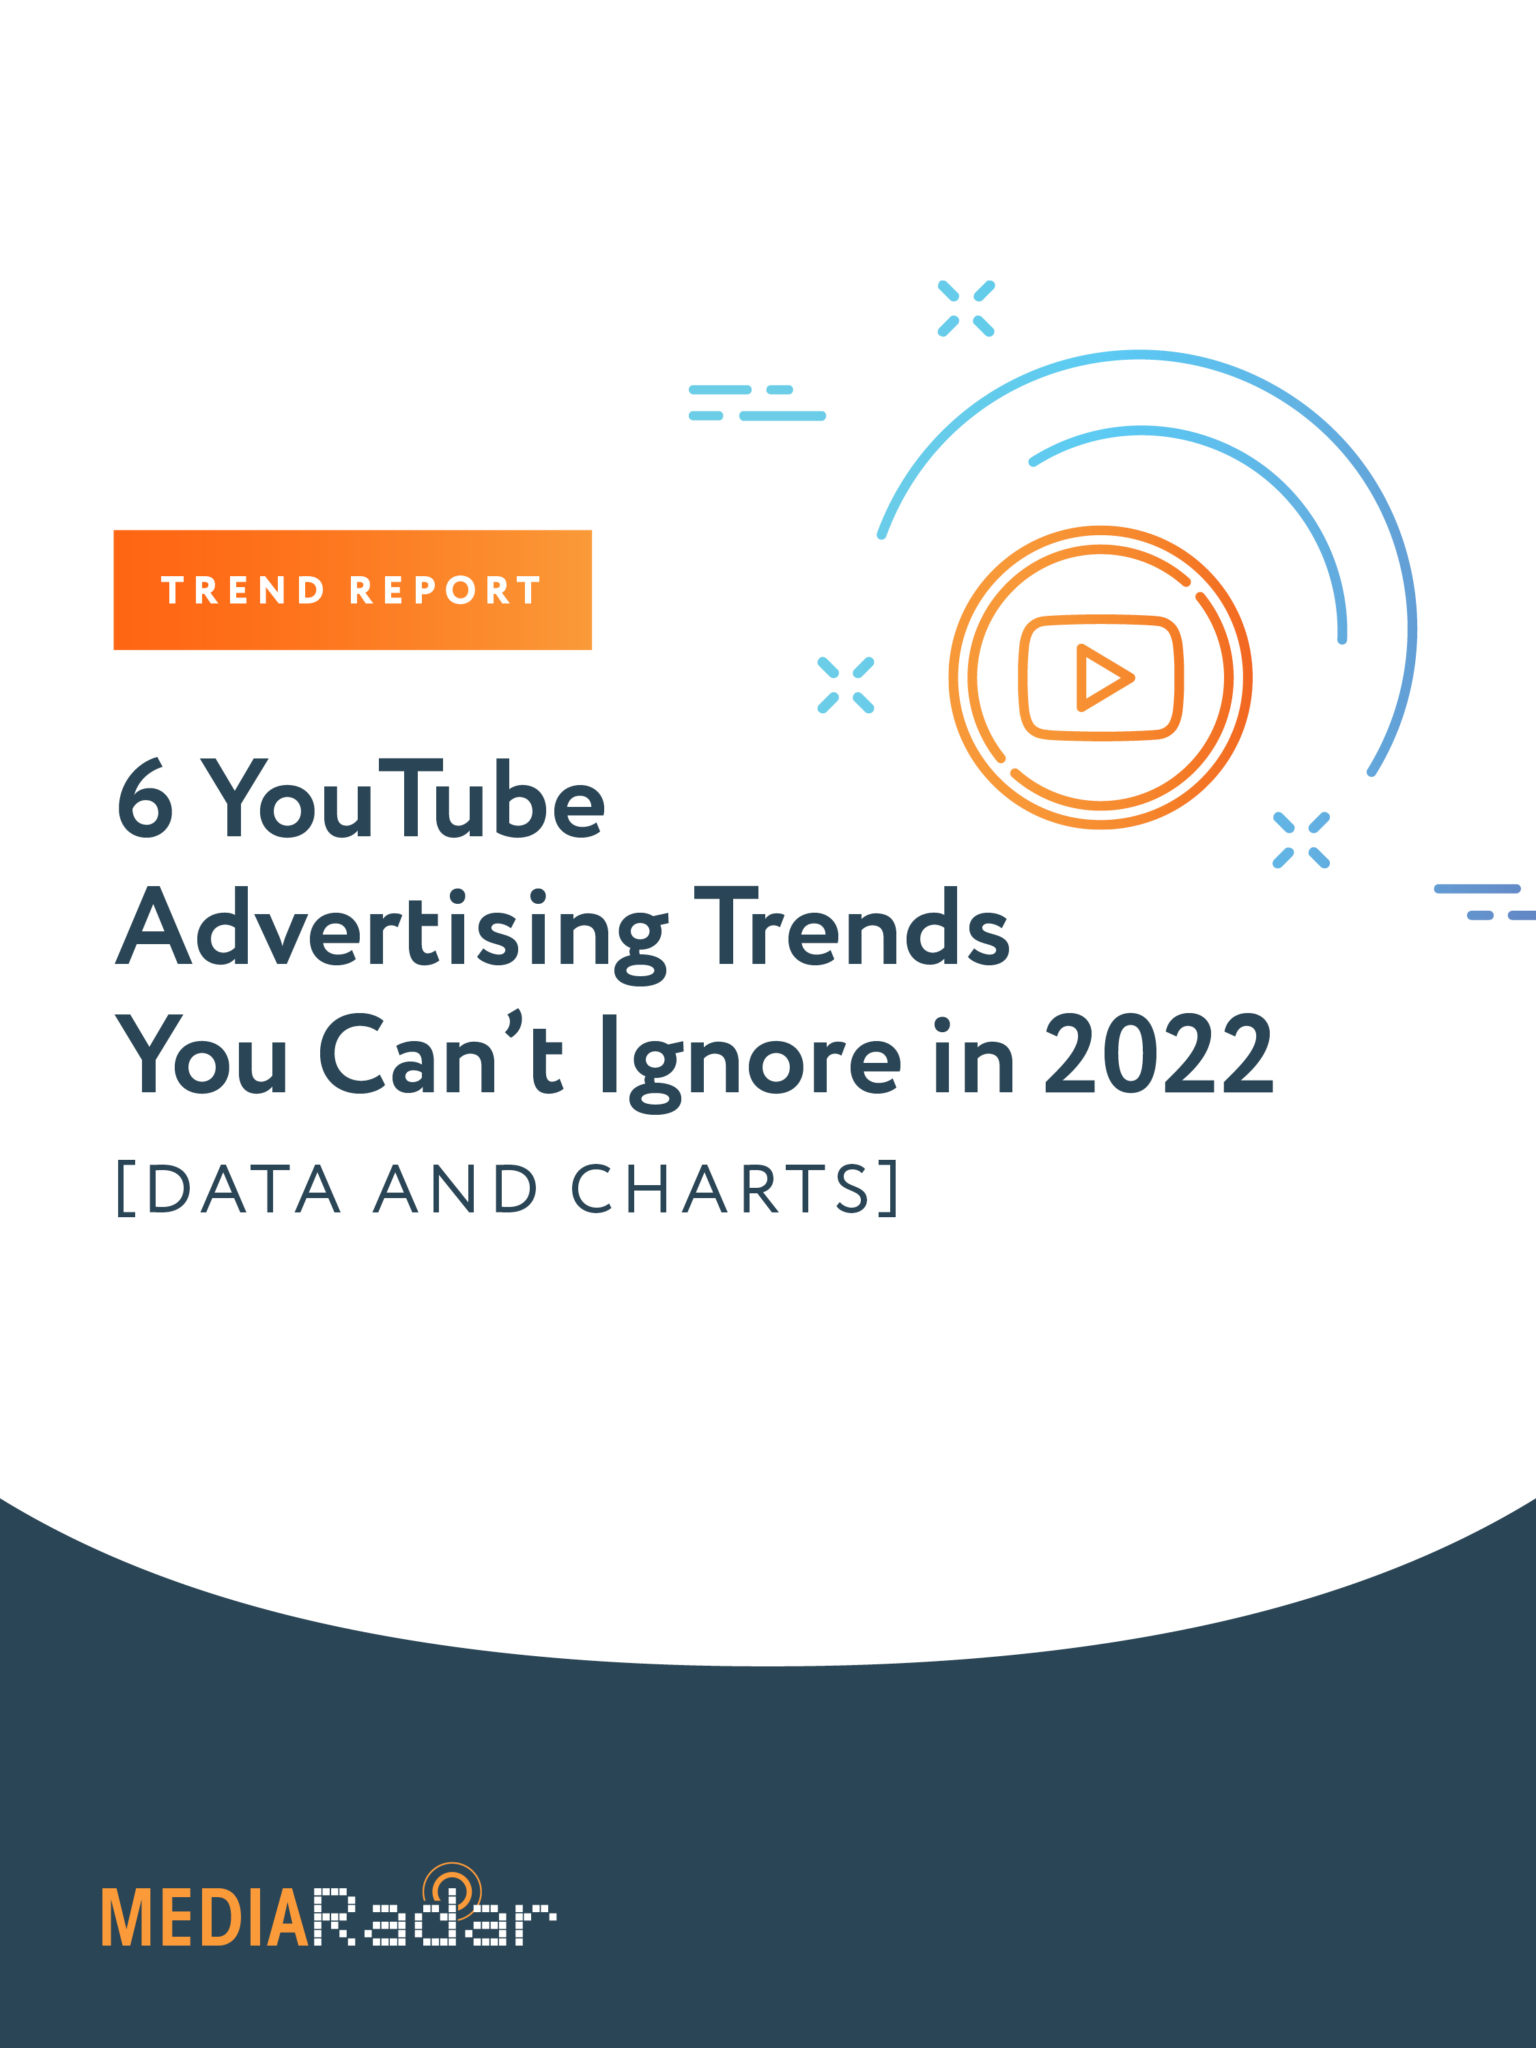 6 YouTube Advertising Trends You Can’t Ignore in 2022 [Data and Charts]